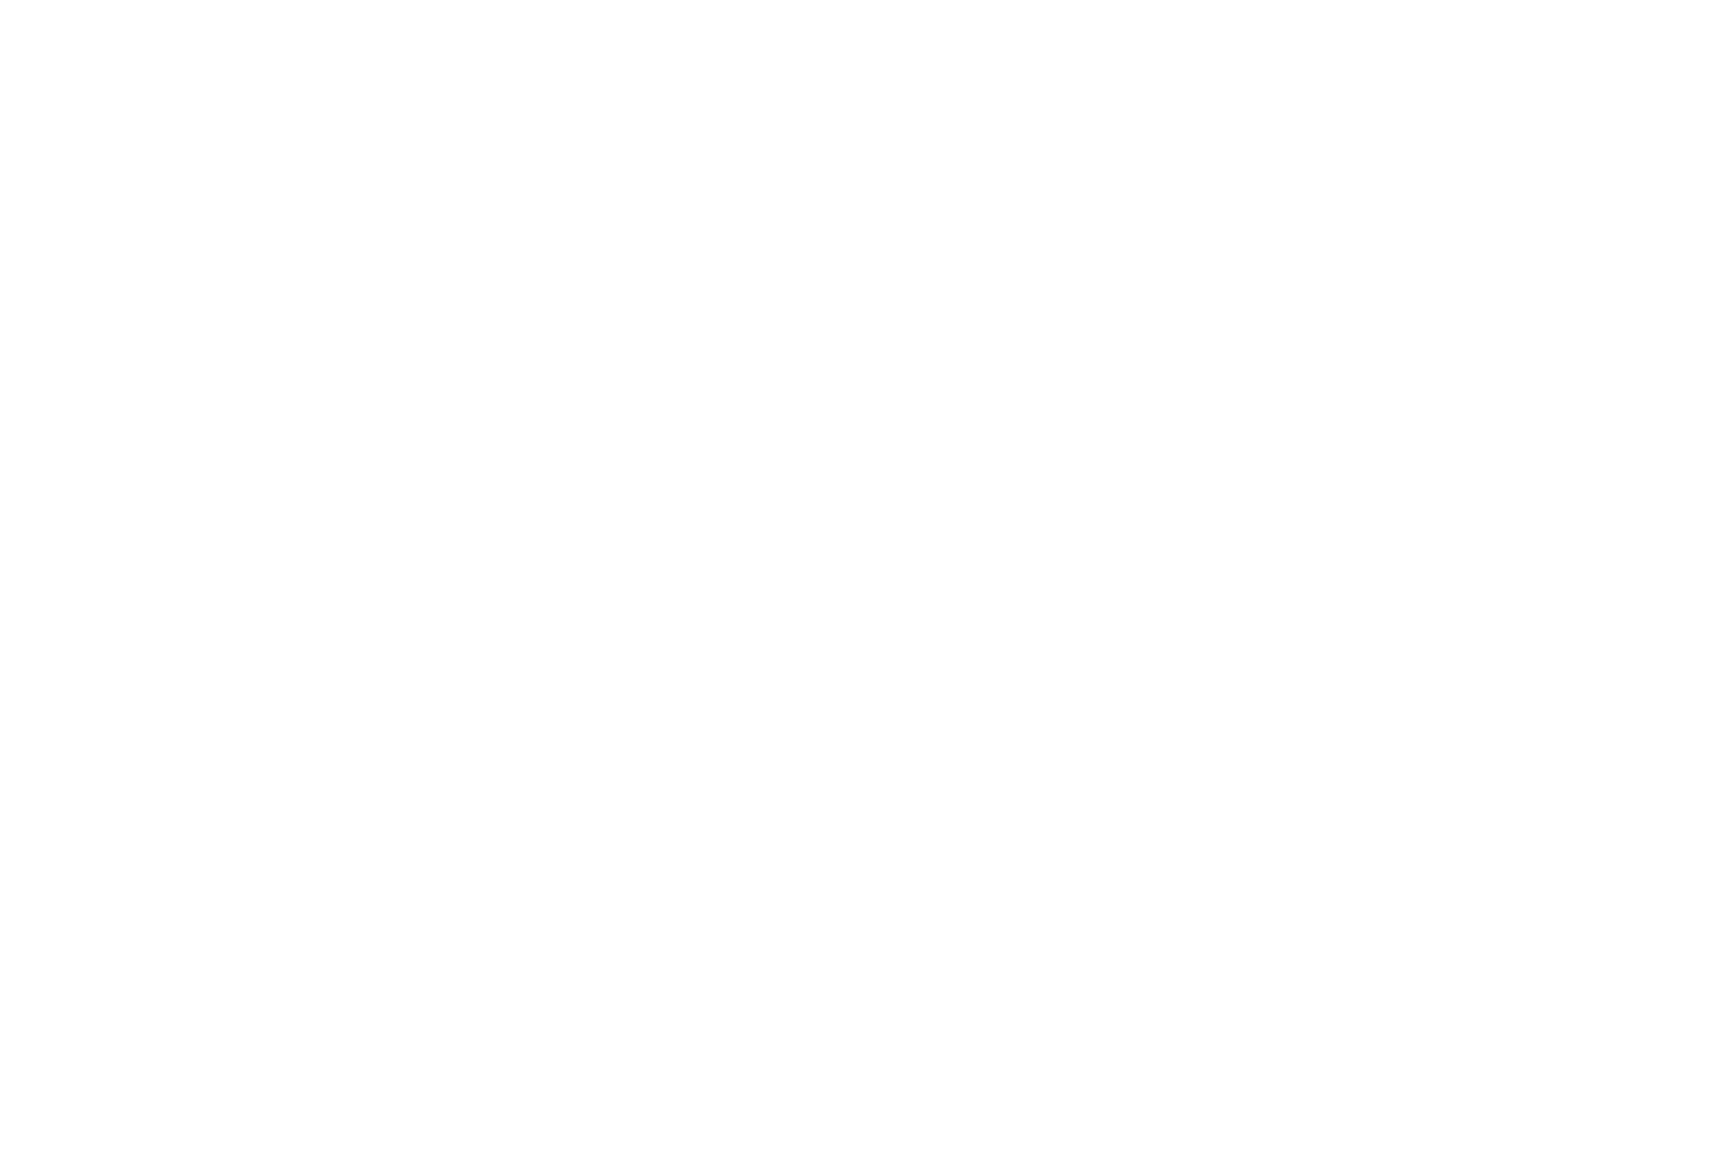 _OFFICIAL SELECTION - Chinese American Film Festival - 2018